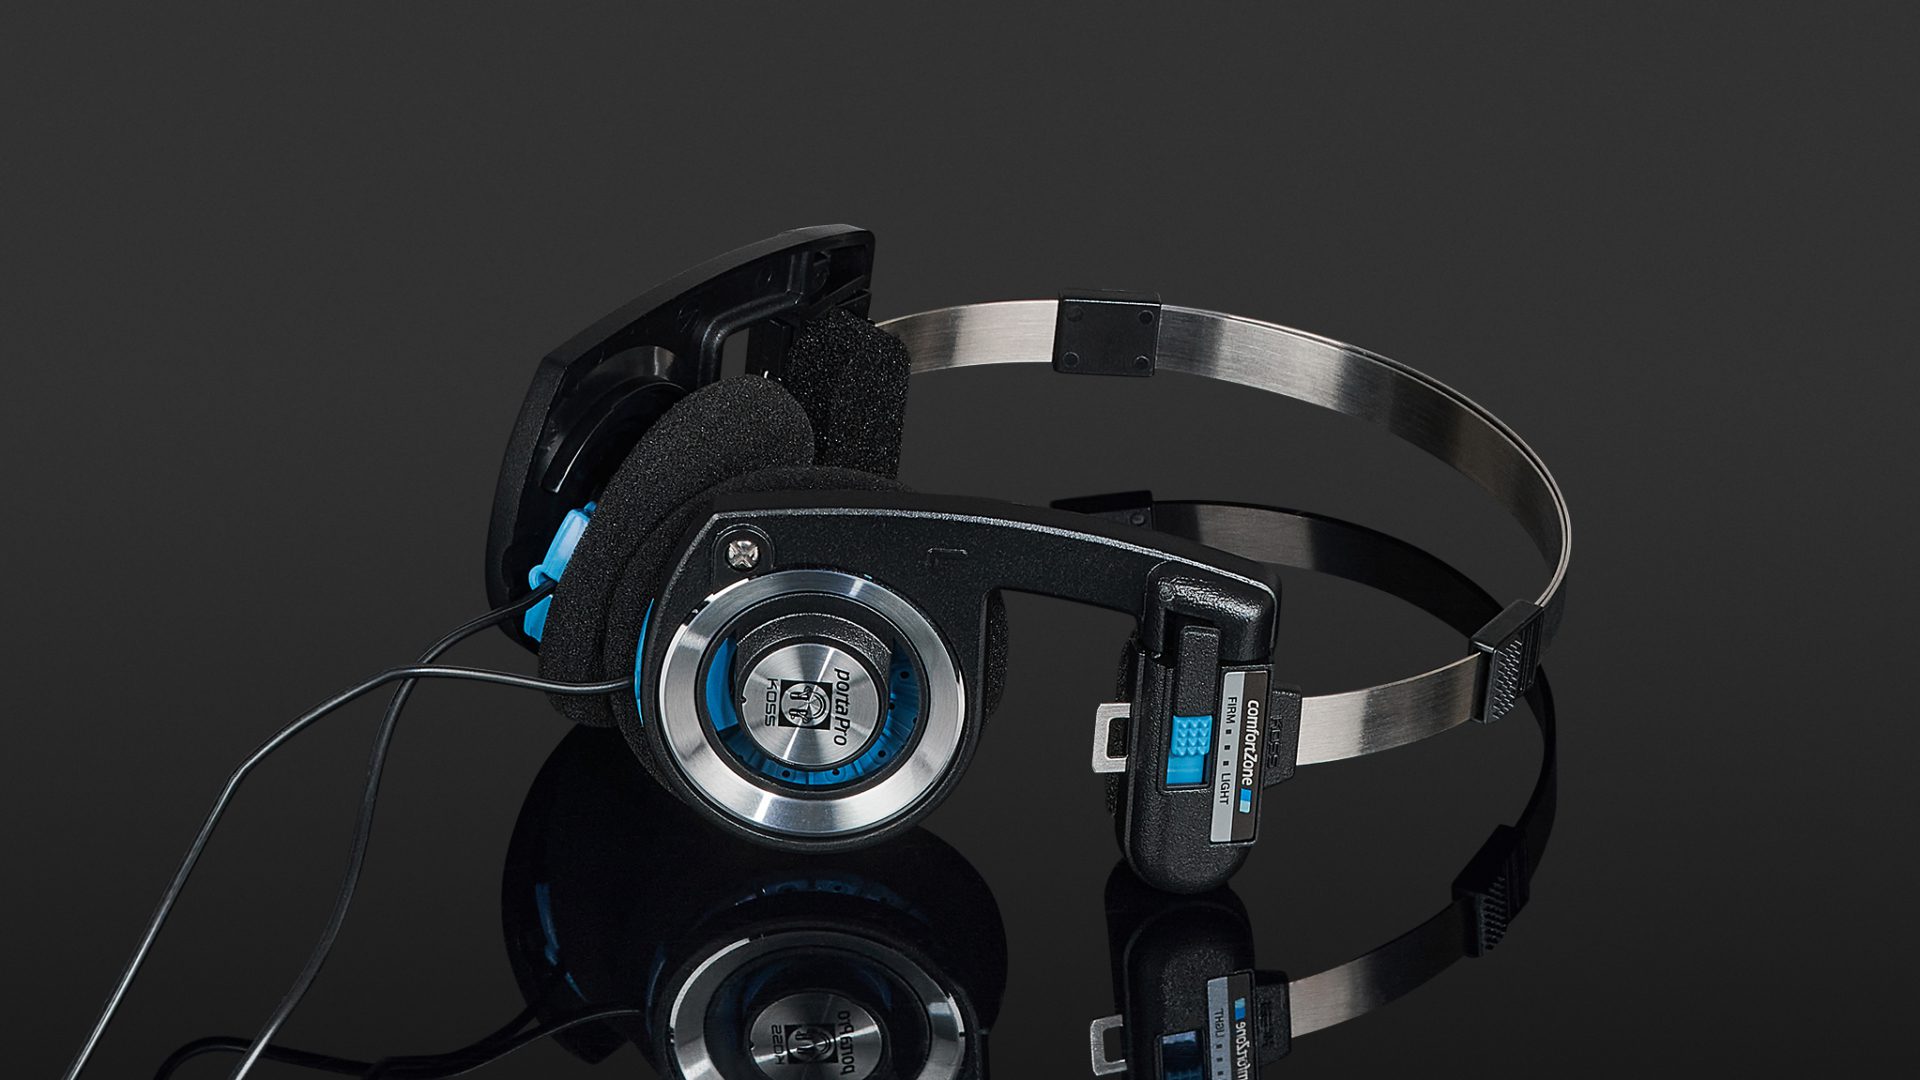 Review: Koss Porta Pro Wireless are the classic headphones plus